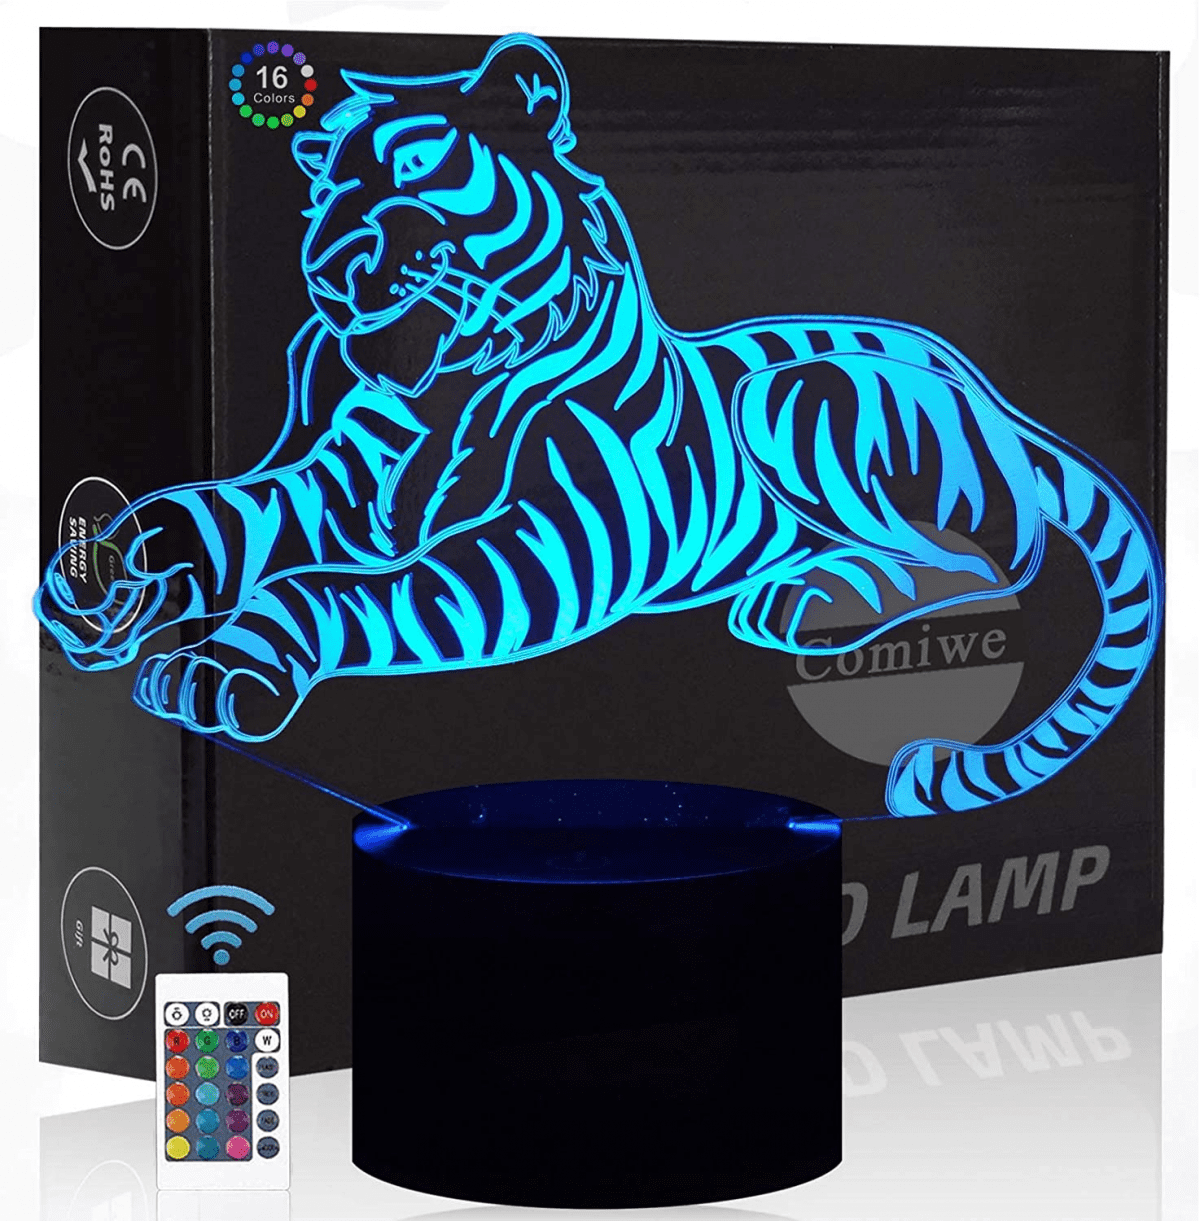 Comiwe Dolphin 3D Illusion Night Light Toys,16 Colors Change Smart Touch & Remote Control,Home Decor LED Bedside Table Desk Lamp,Christmas Birthday Gift for Girls Boys Kids Adults Friends & Family 